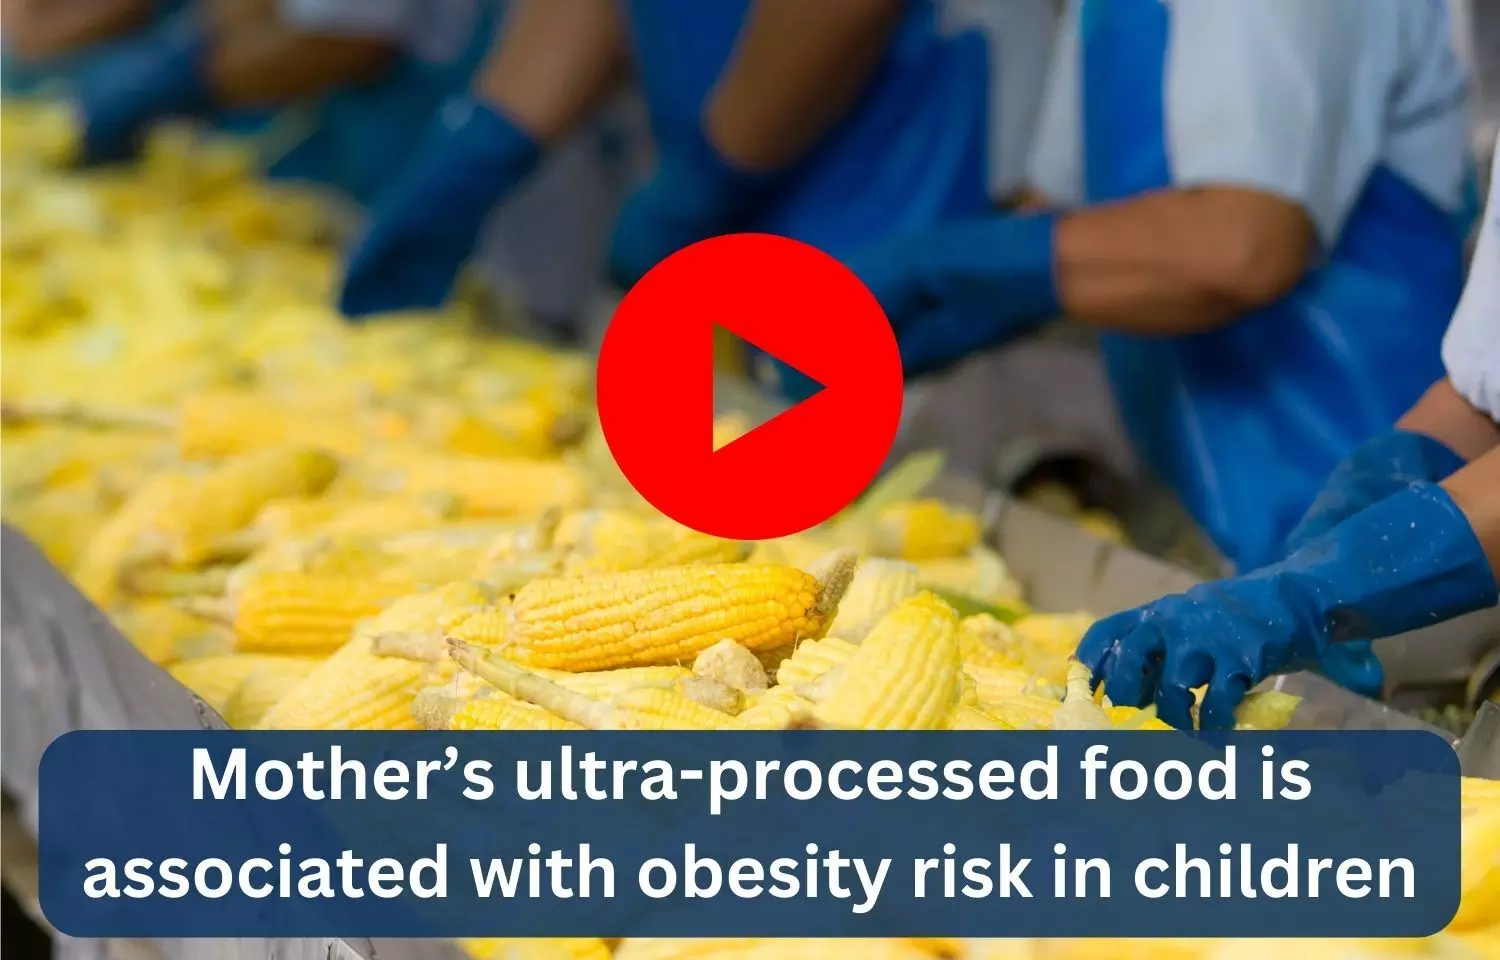 Mothers ultra-processed food consumption associated with obesity risk in children